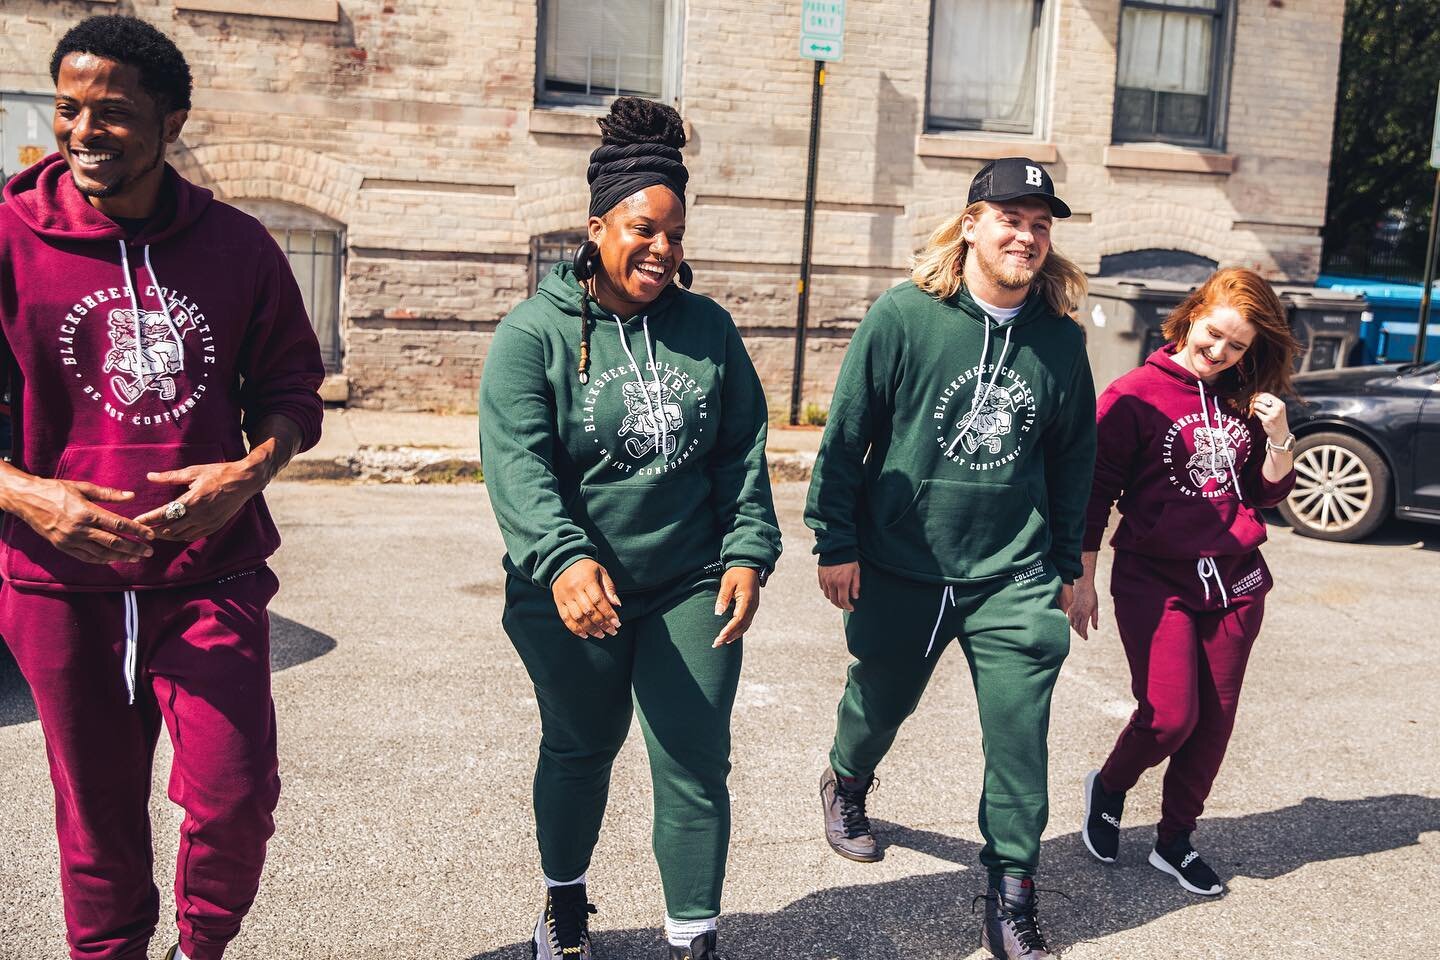 Sweater weather is in full effect. We&rsquo;ve got some coziness for the peculiar! Sweat suits in maroon and forest green are the vibe this fall. 🔥🍂🍁

P.S. Preorders are going out this week. 🙌🏾